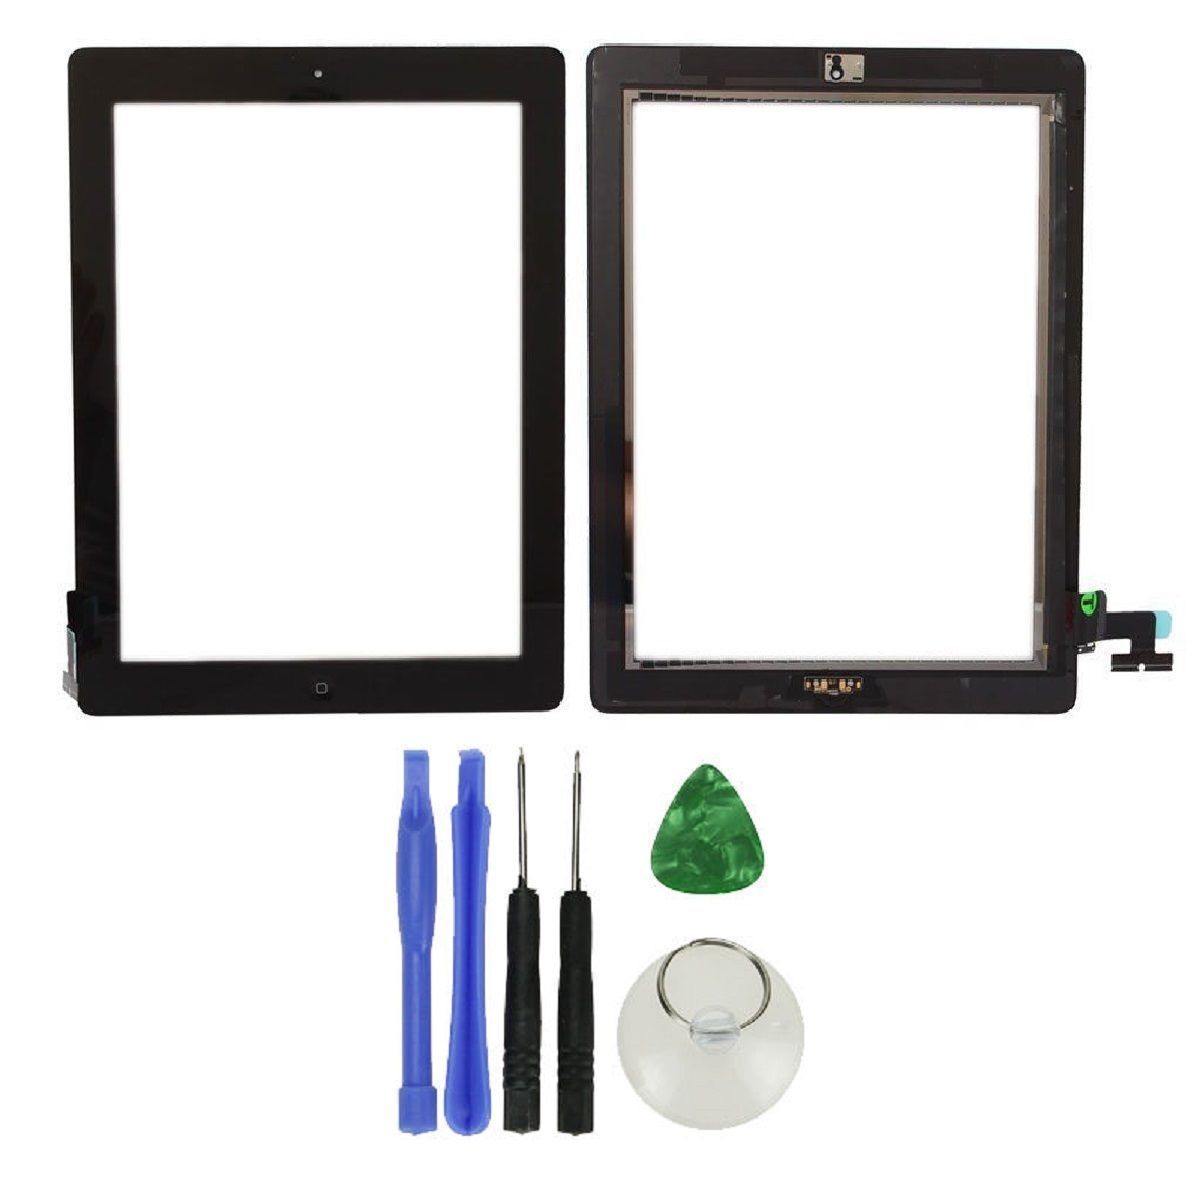 OEM SPEC For iPad 2 3 4 Air Mini 1 2 Touch Screen Digitizer Replacement Adhesive